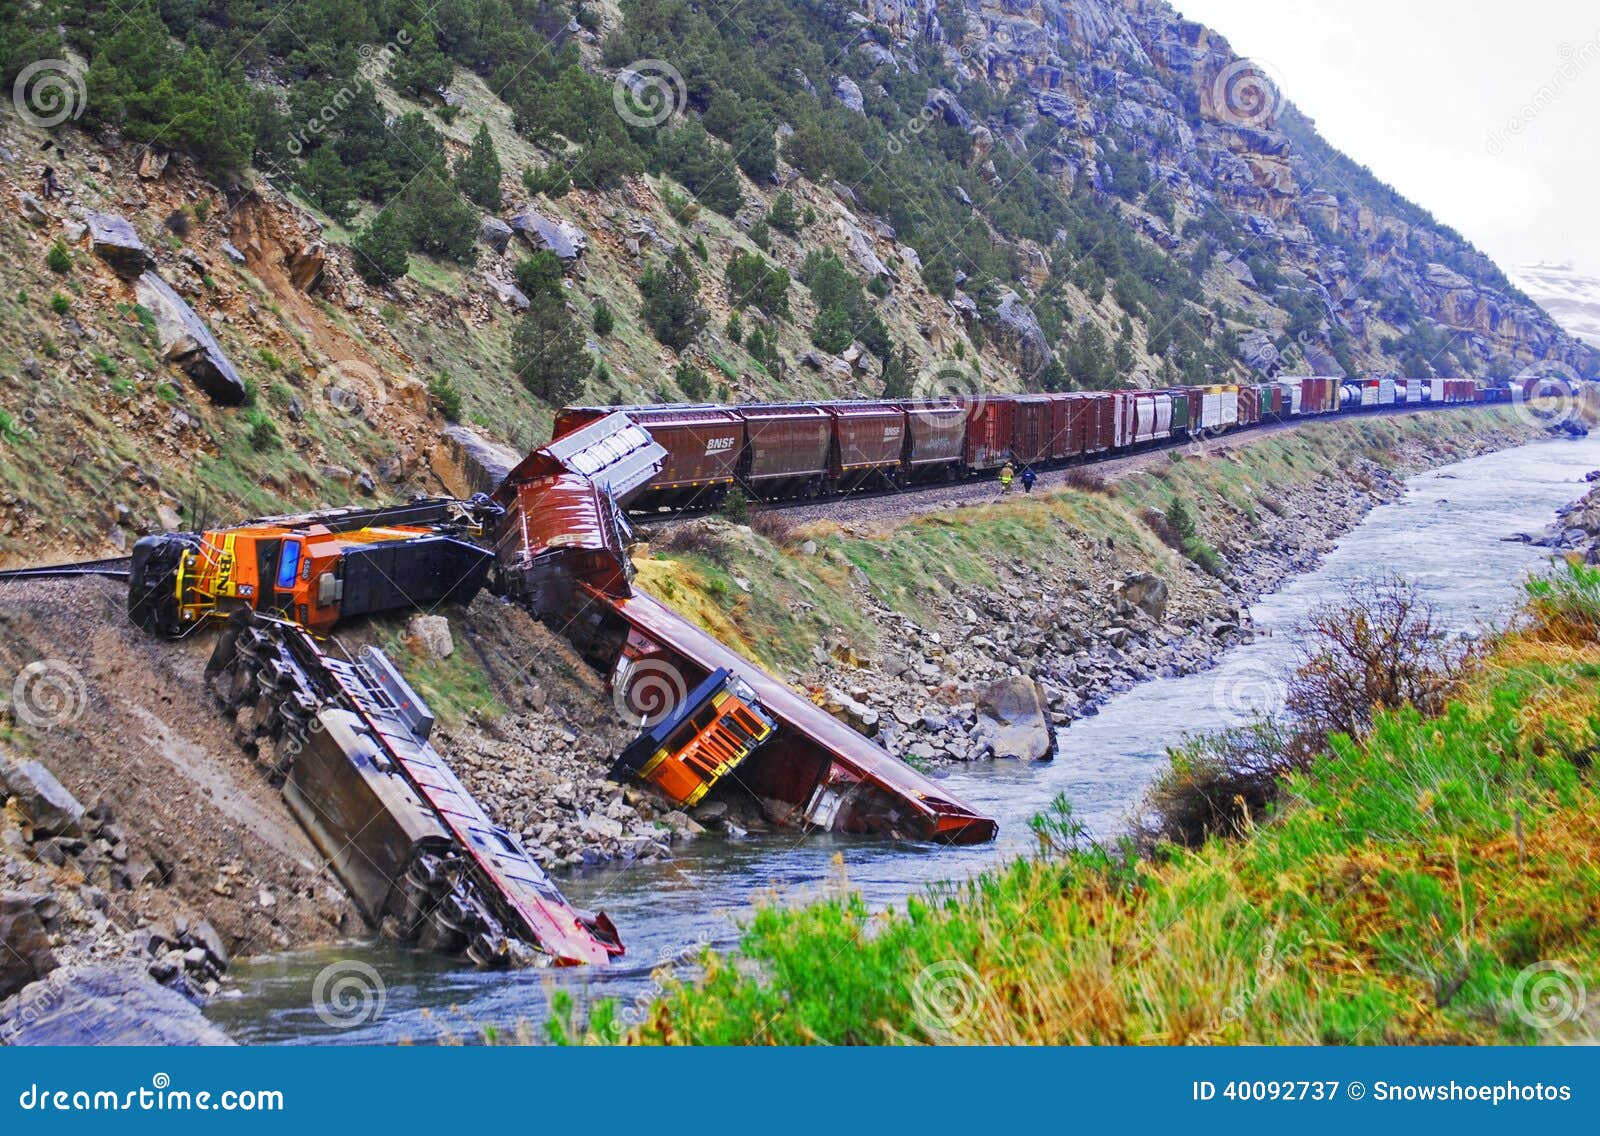 train-wreck-took-place-canyon-next-to-river-40092737.jpg